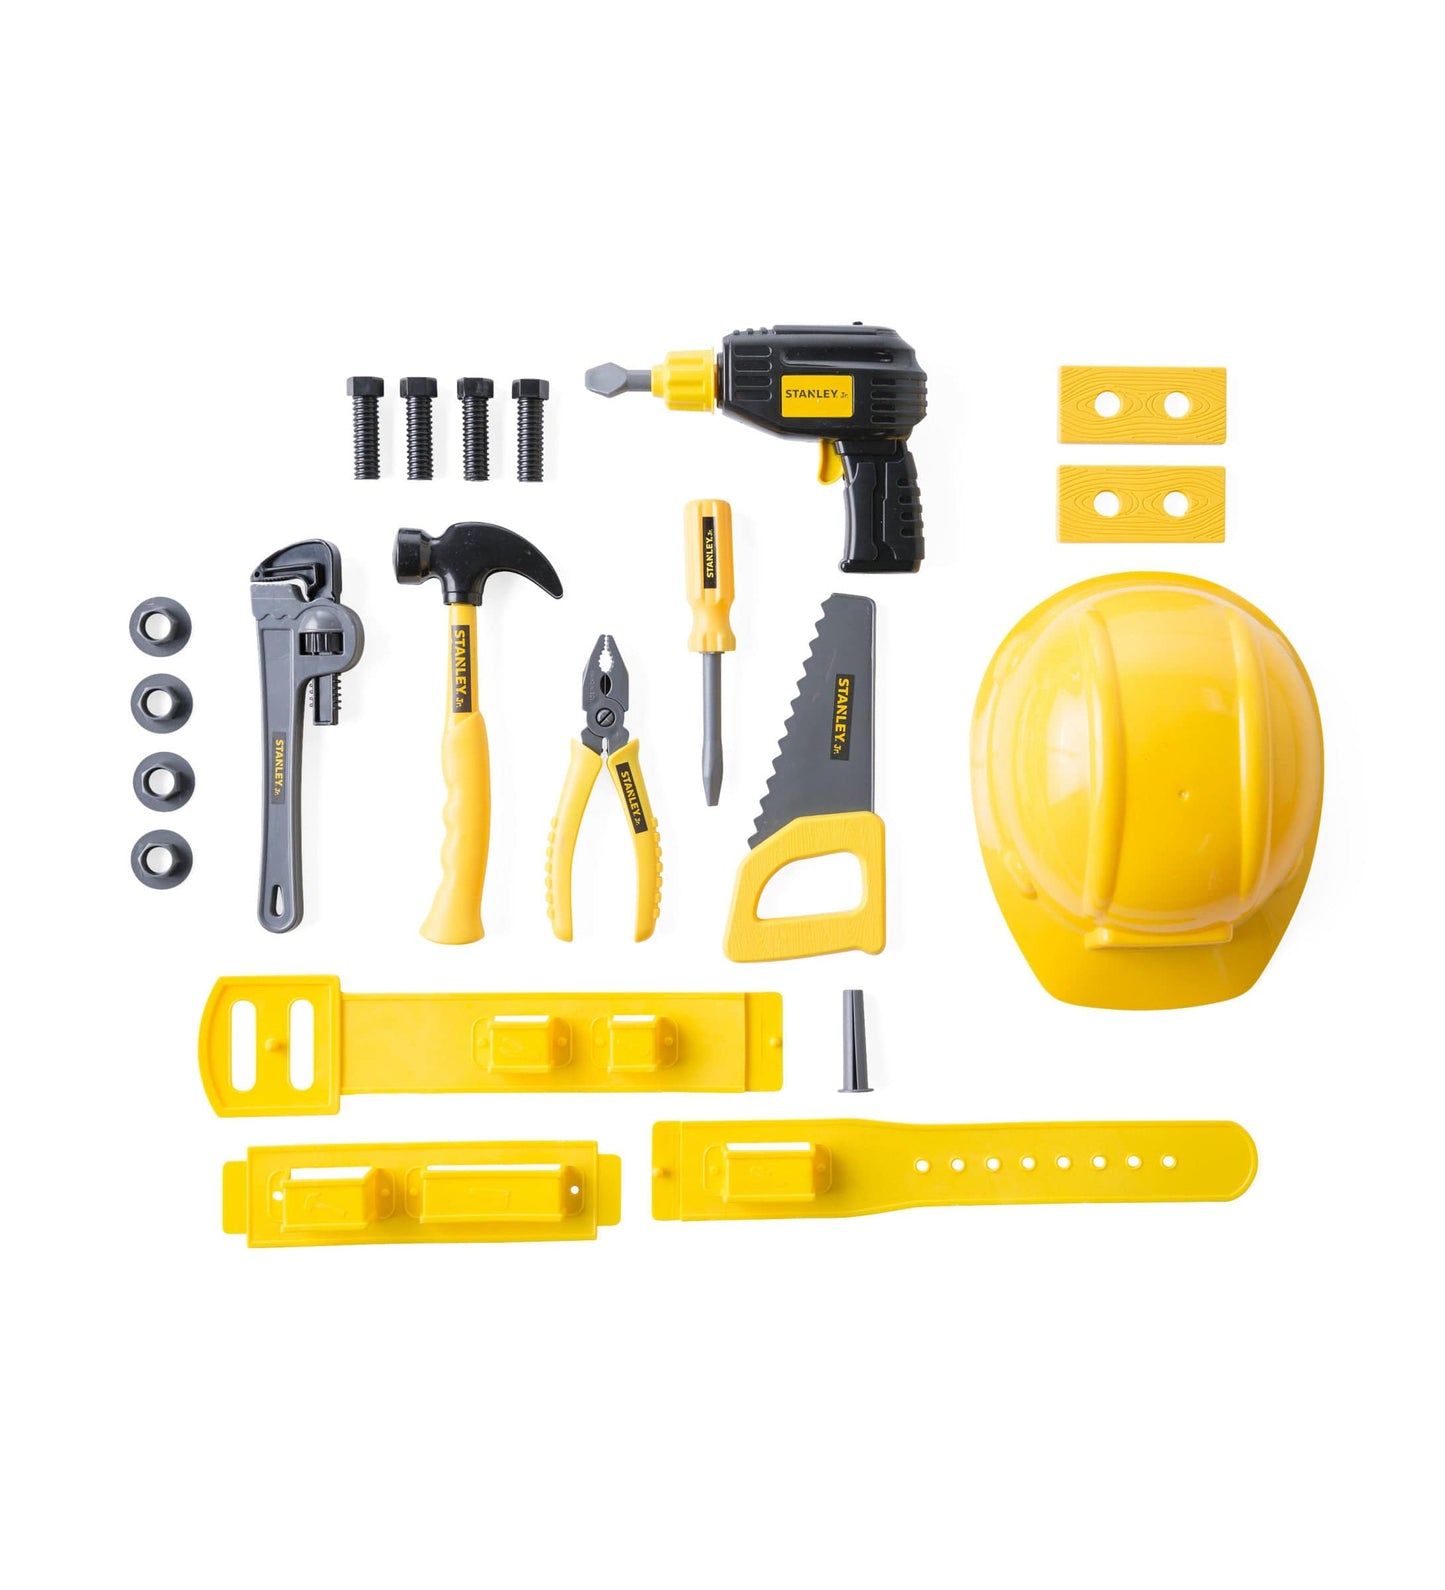 Stanley Jr. 19-Piece Pretend-Play Tool Set with Hard Hat and Tool Belt